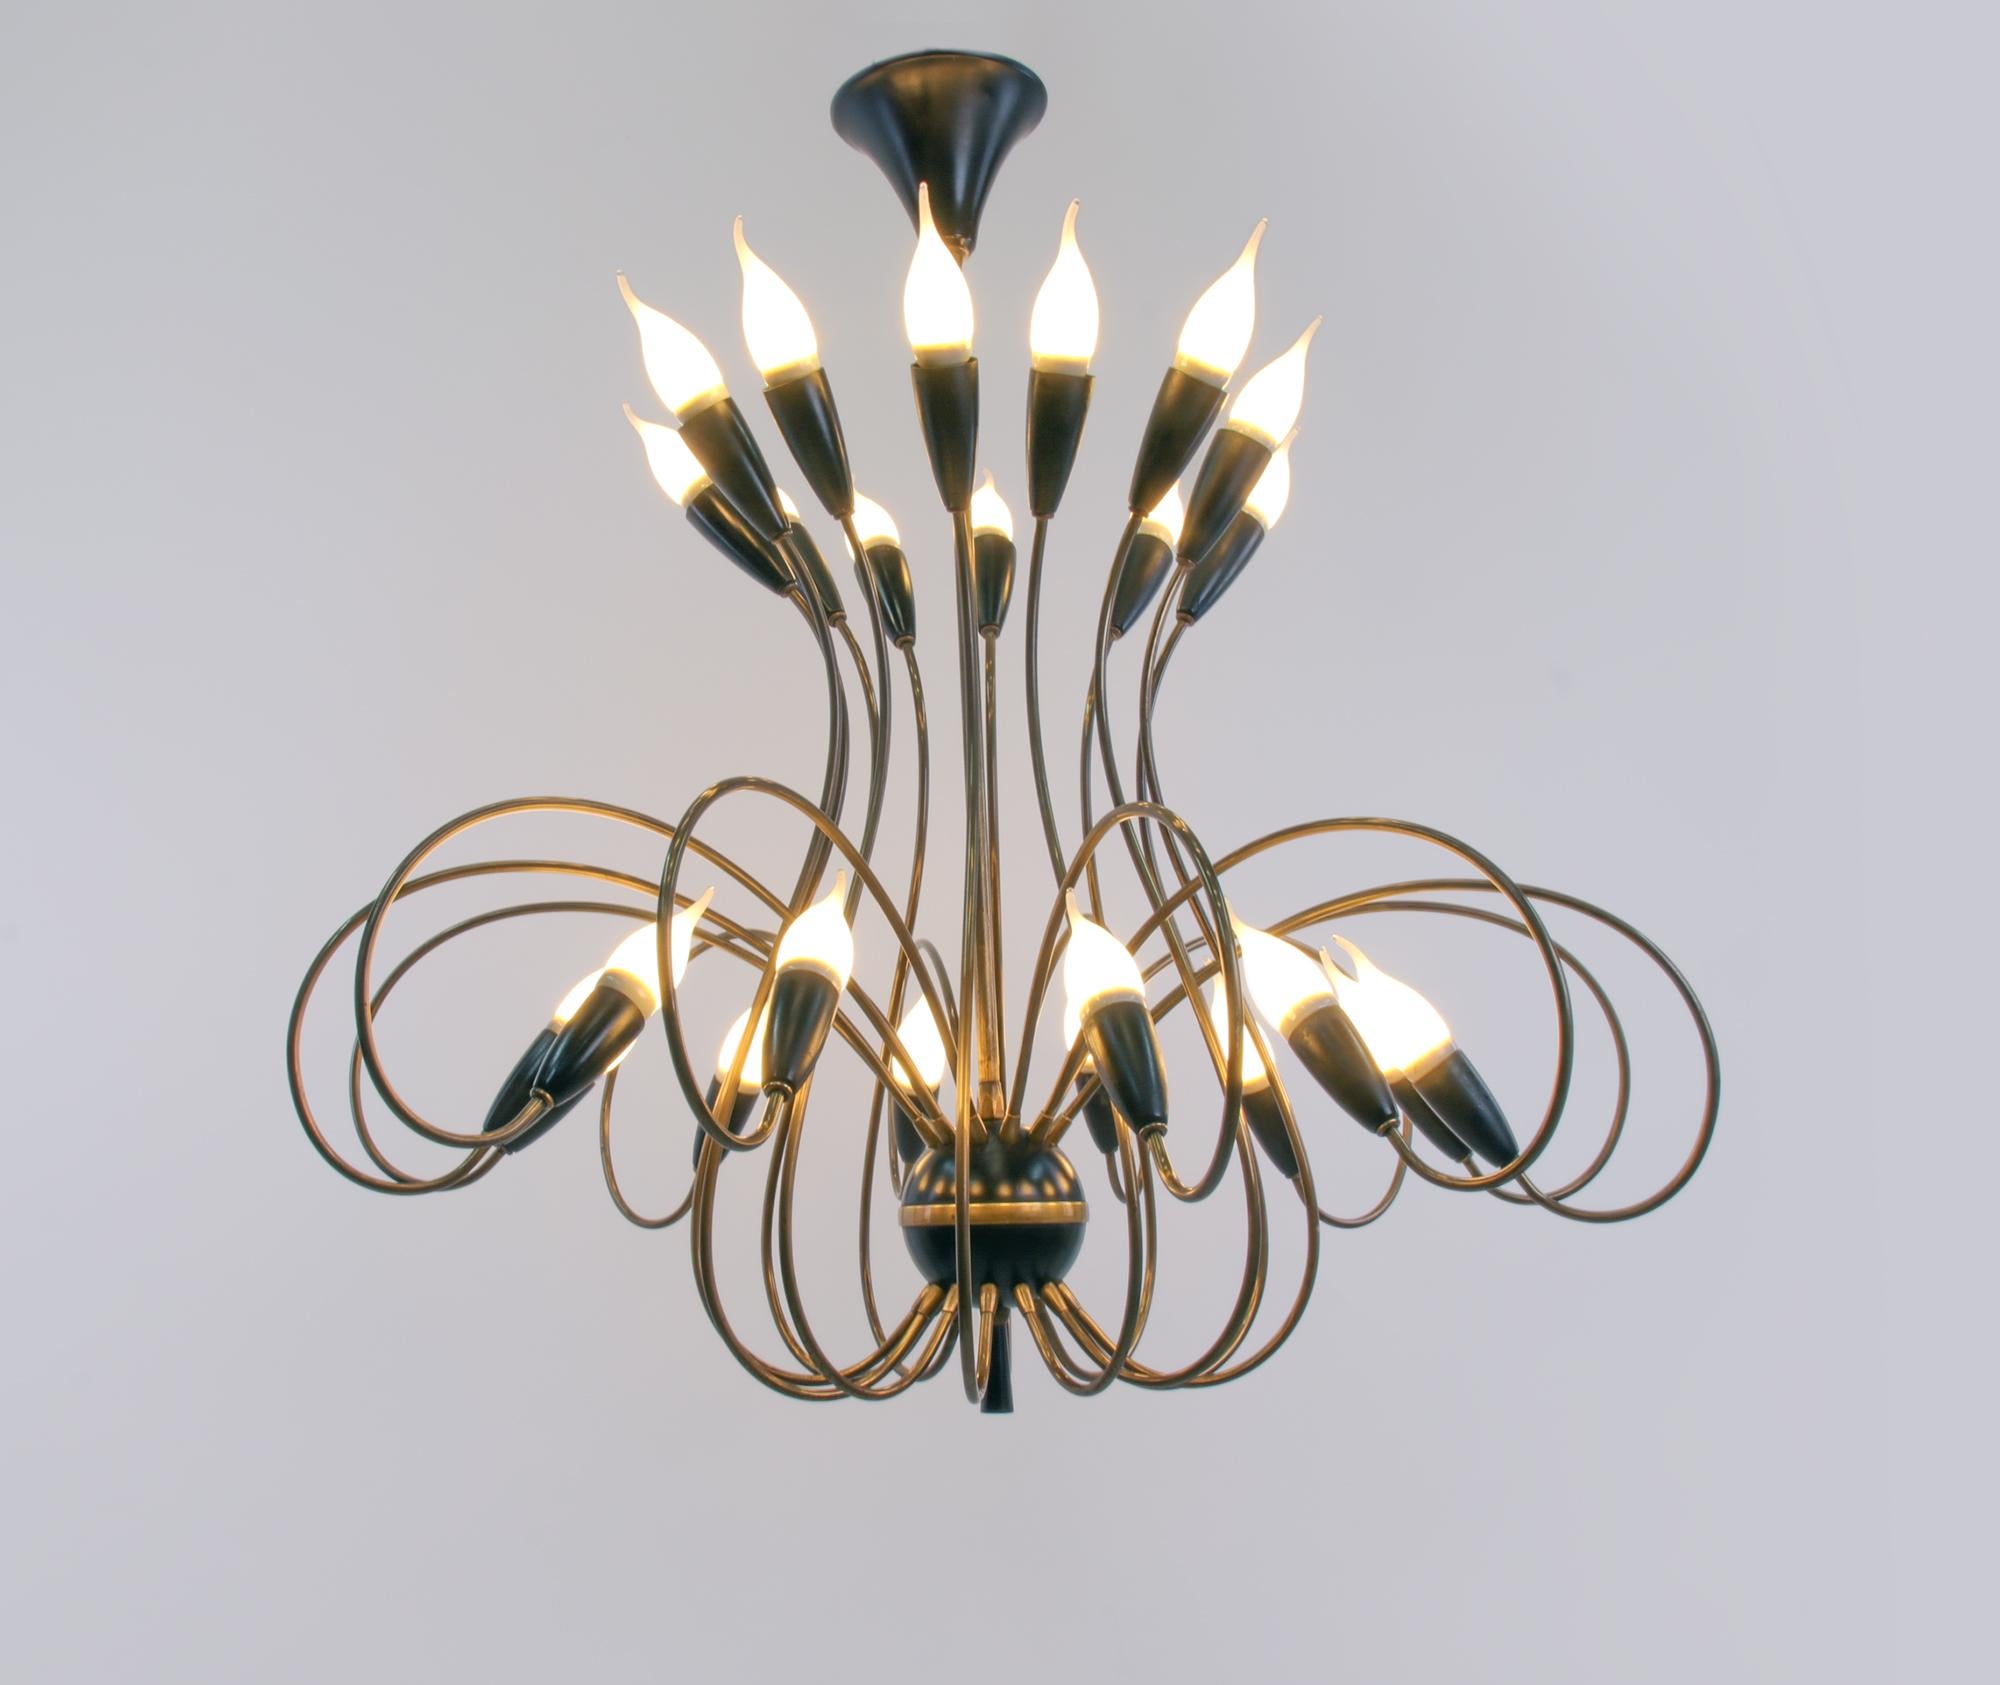 Spectacular large chandelier with 24 curved brass arms ending with black lampholders. Chandelier illuminates beautifully and offers a lot of light. Gem from the time. With this light you make a clear statement in your interior design. A real